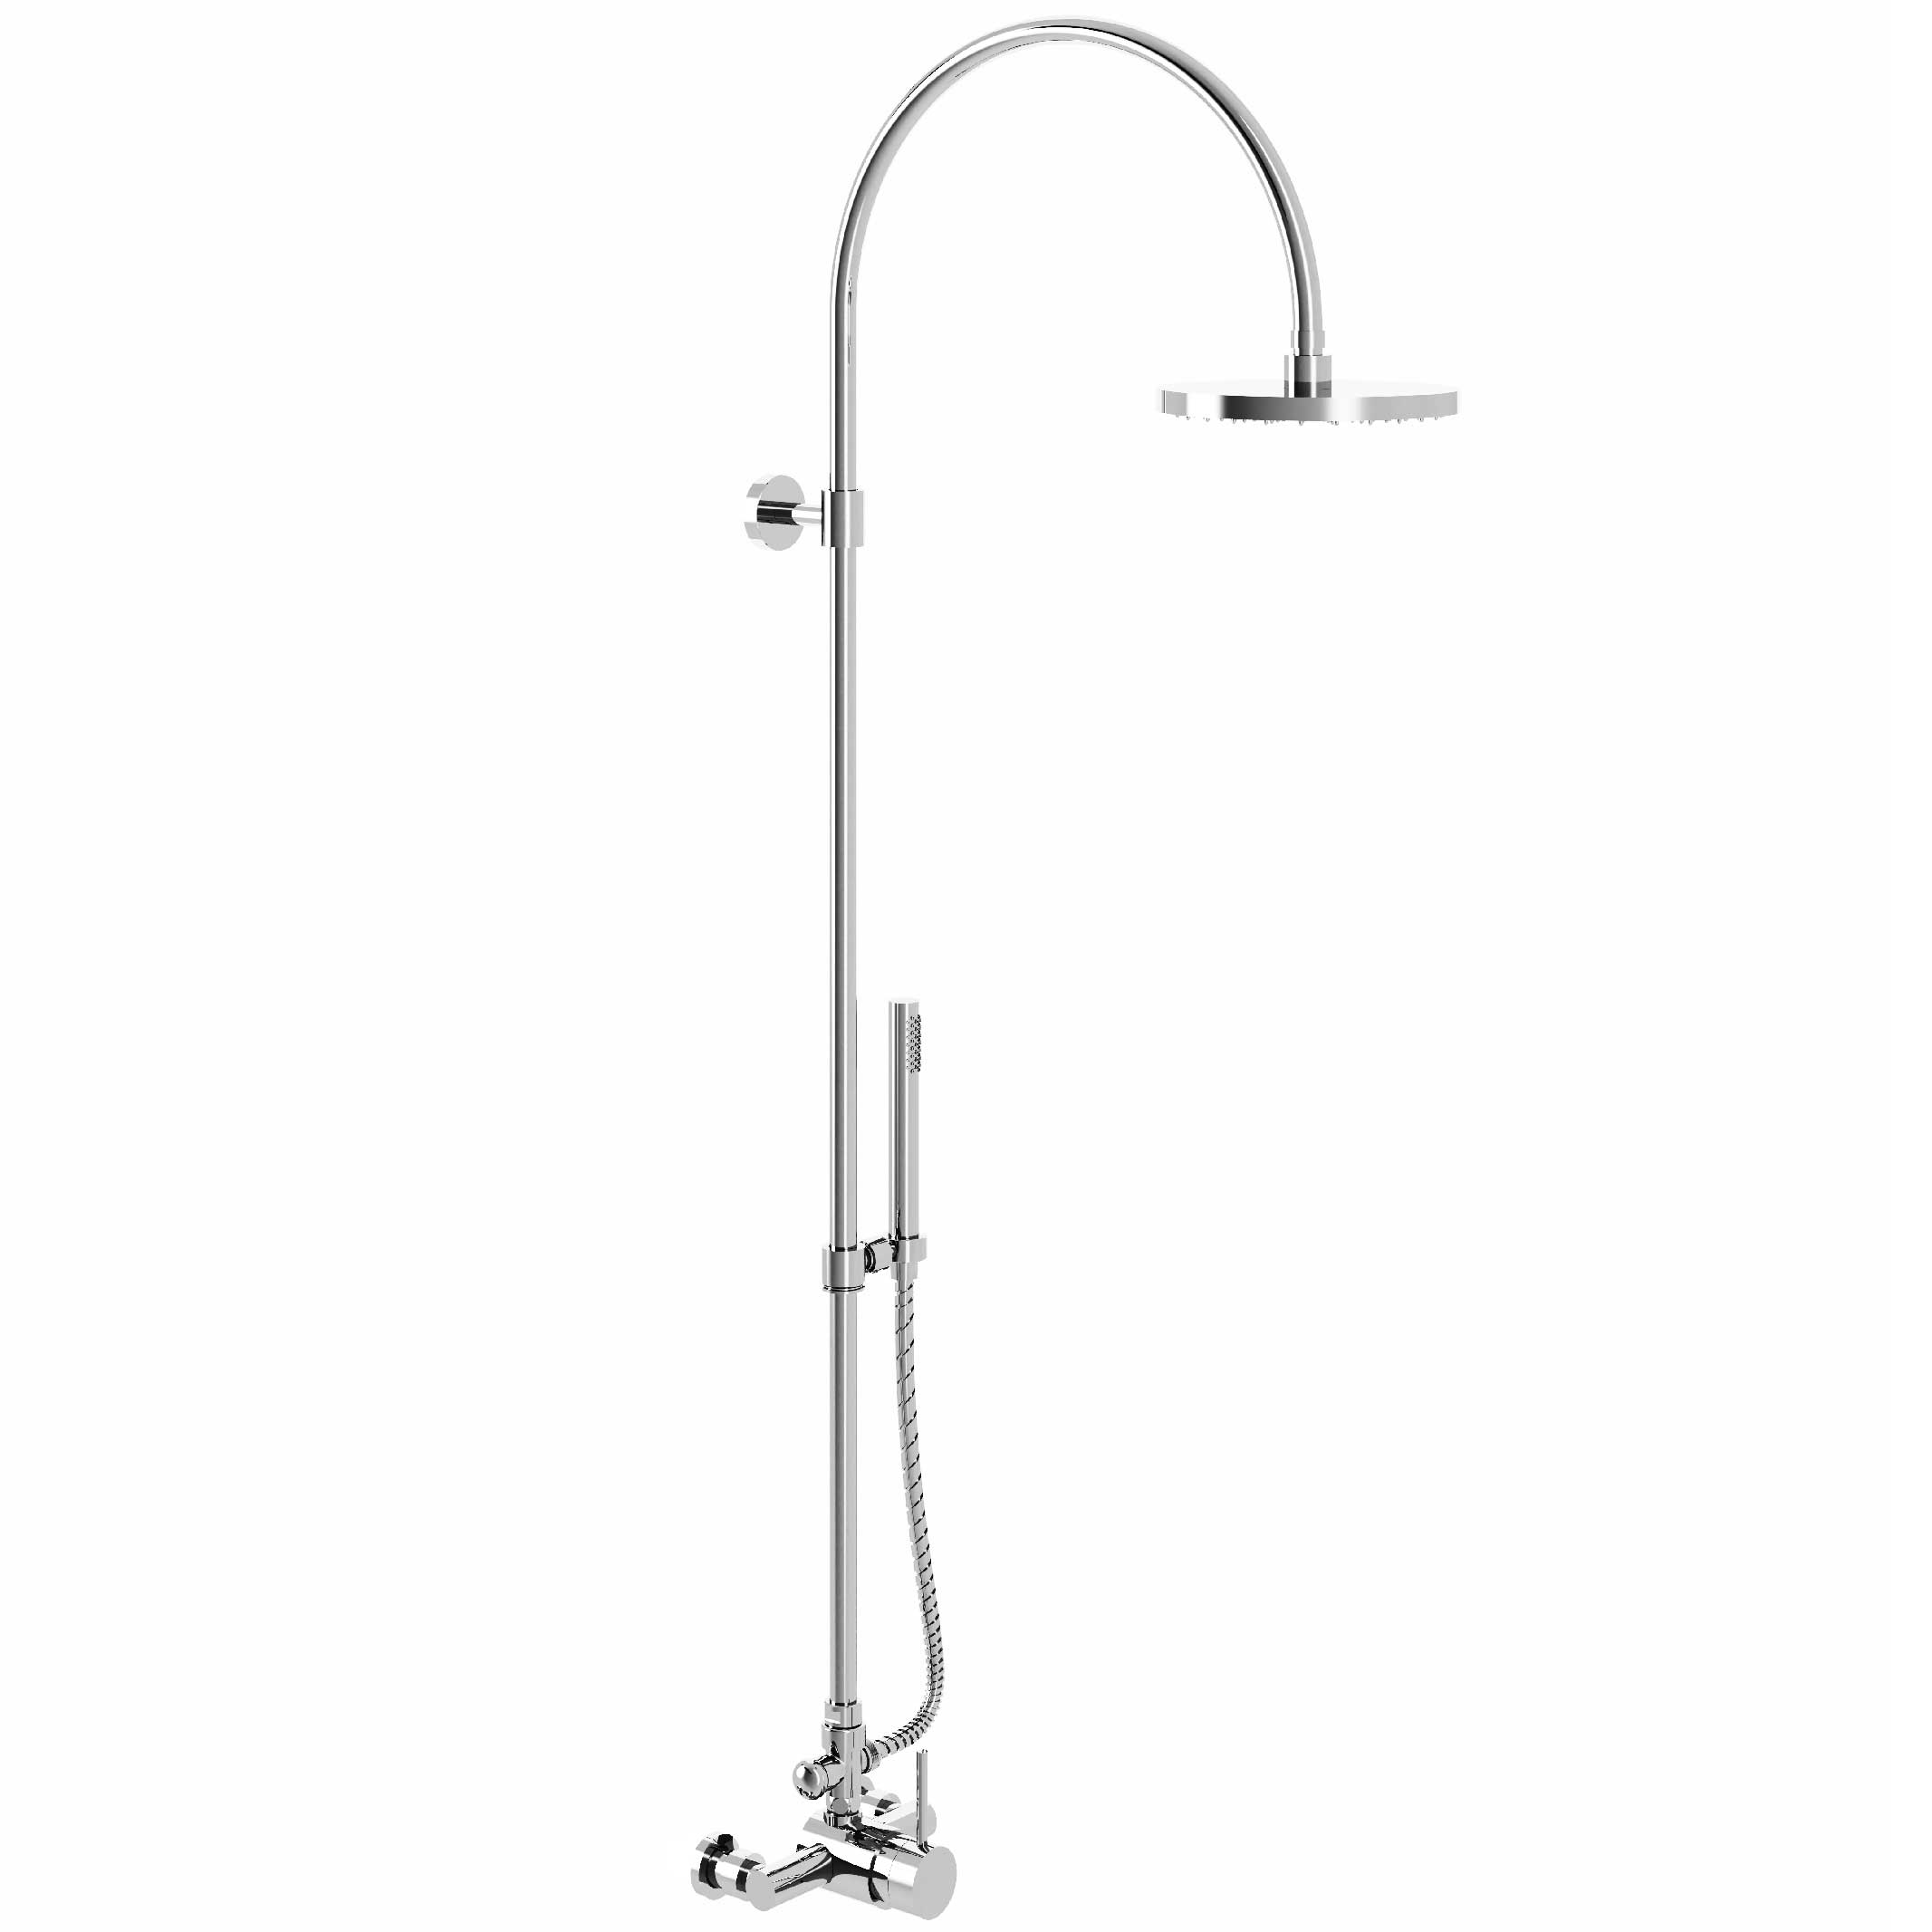 M91-2204M Single-lever shower mixer with column, anti-scaling